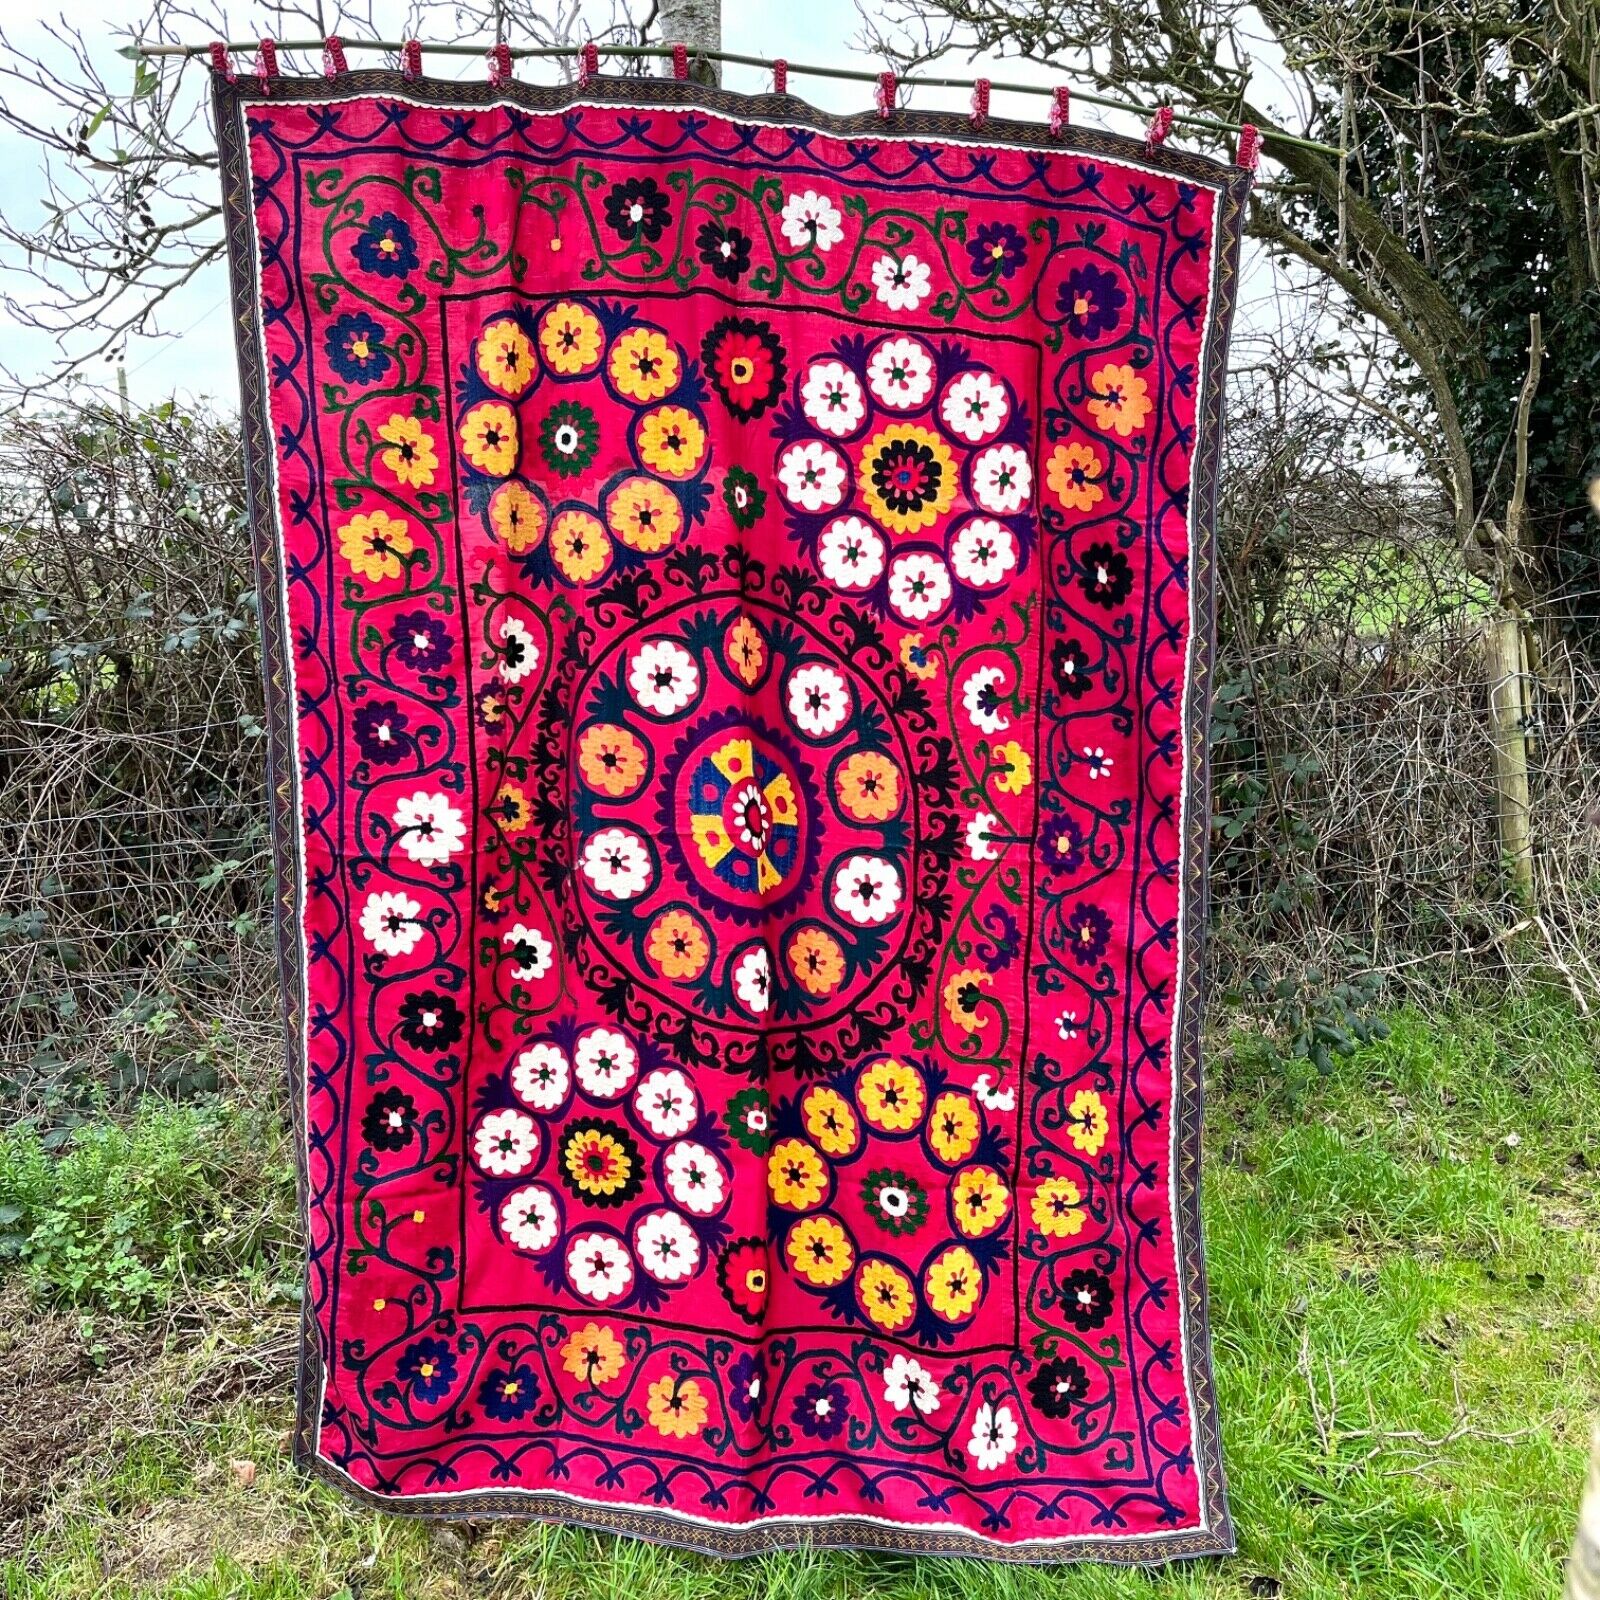 Large floral Suzani Uzbek hand embroidered wall hanging tapestry throw Boho